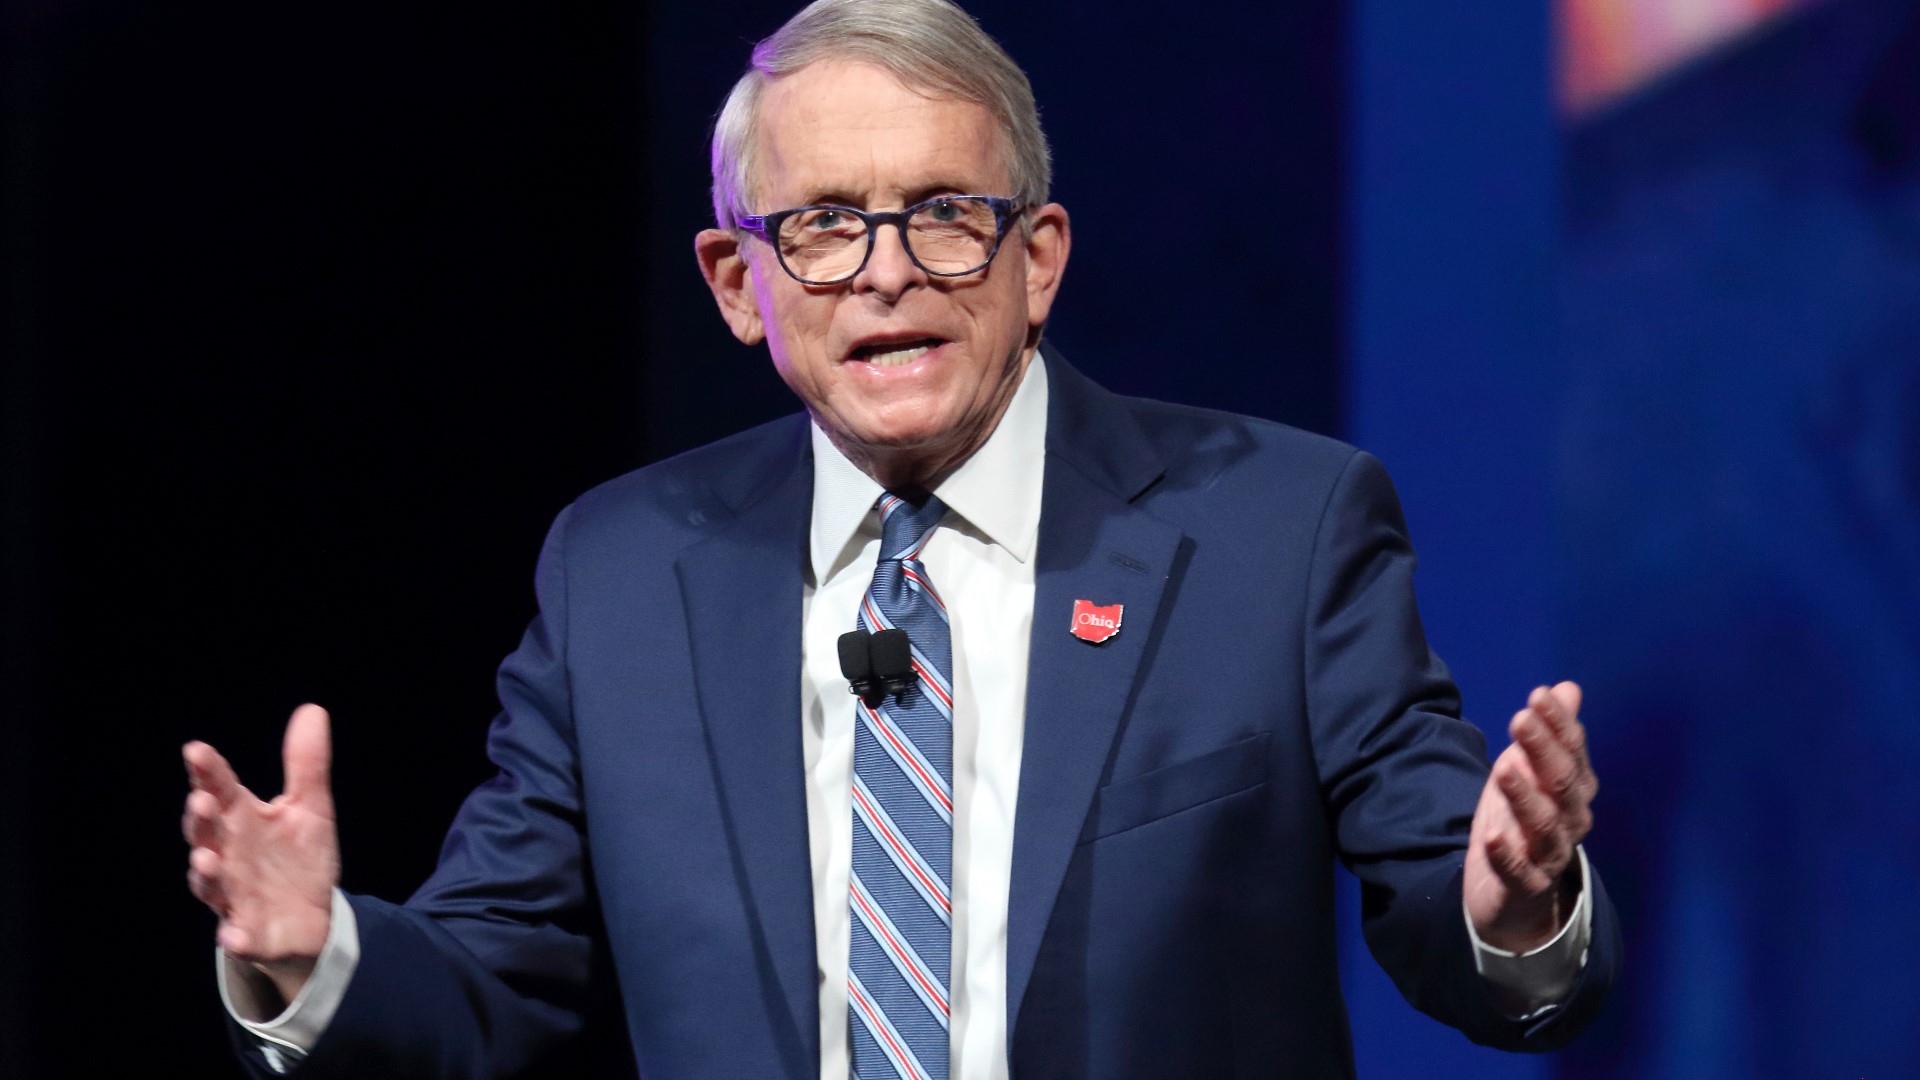 The Ohio Debate Commission said DeWine did not provide a reason and it hopes he reconsiders his decision.